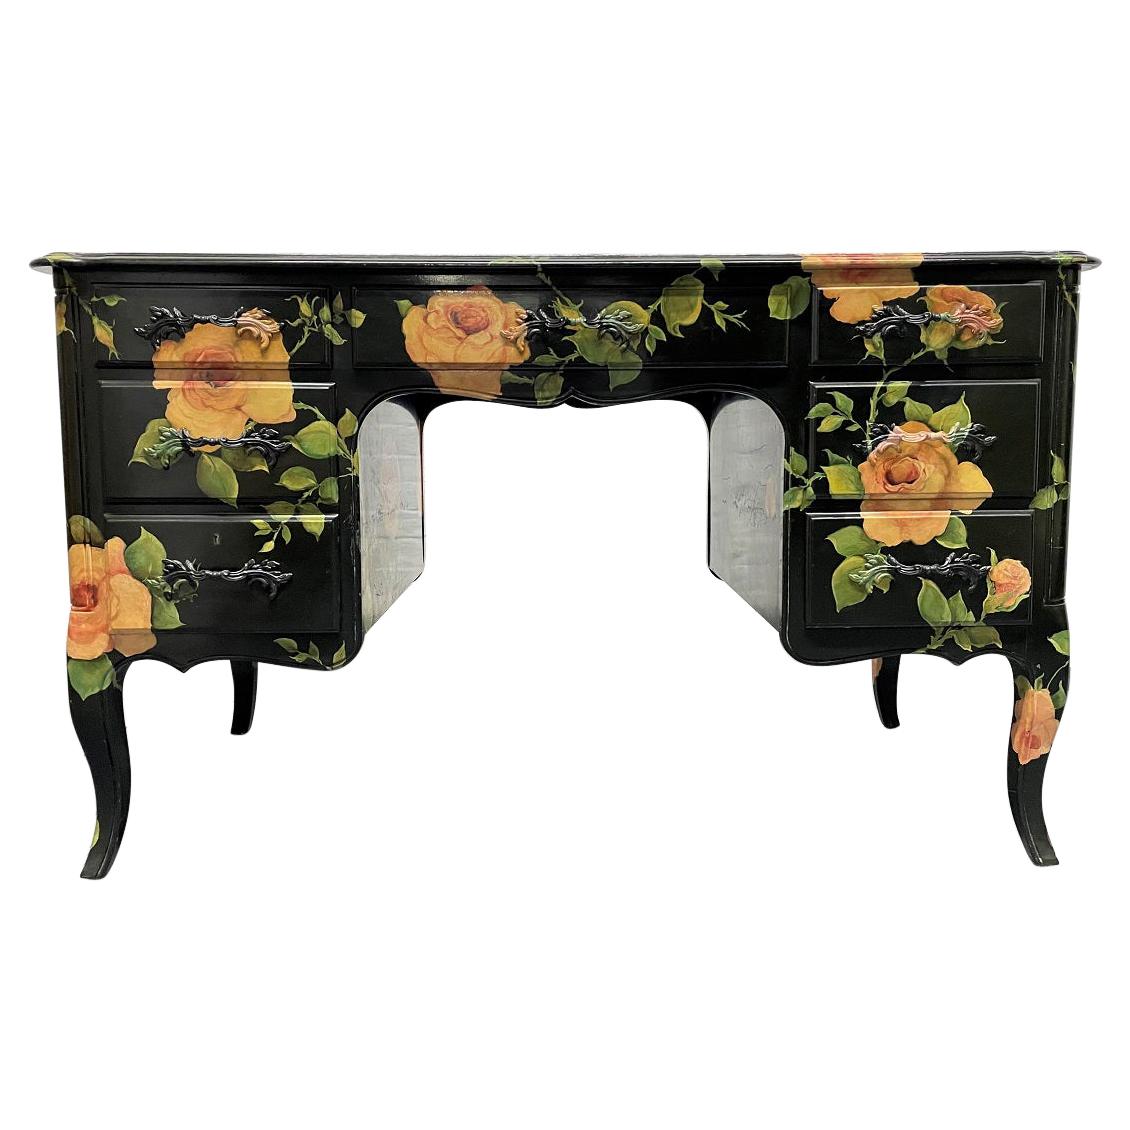 Isabel O'neil Attributed. Hand Painted Kneehole Desk For Sale